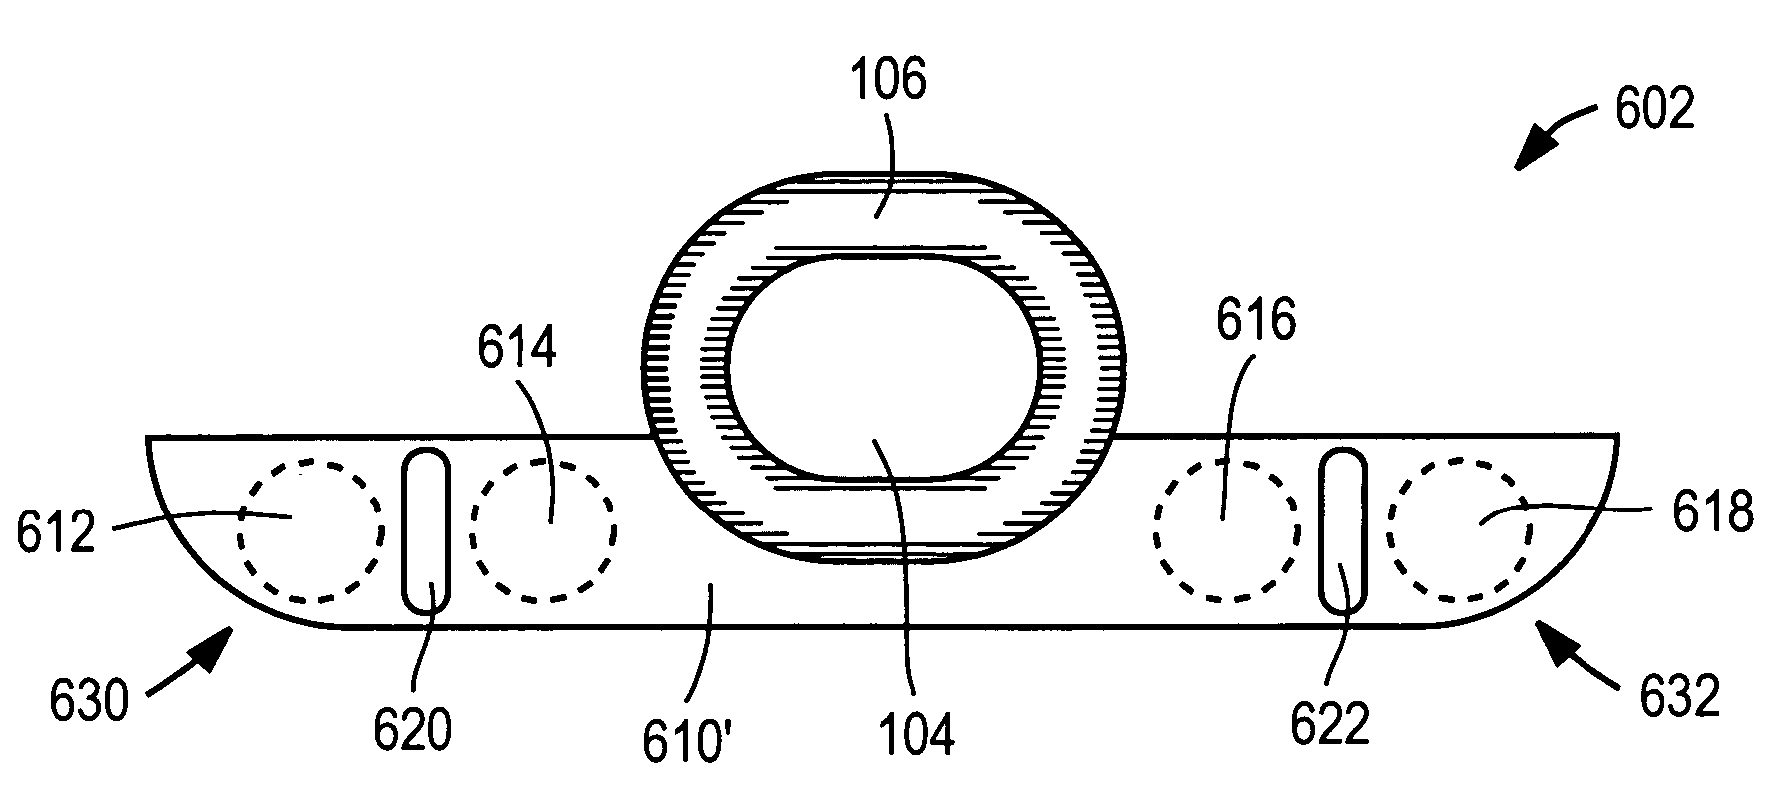 Switch assembly having non-planar surface and activation areas